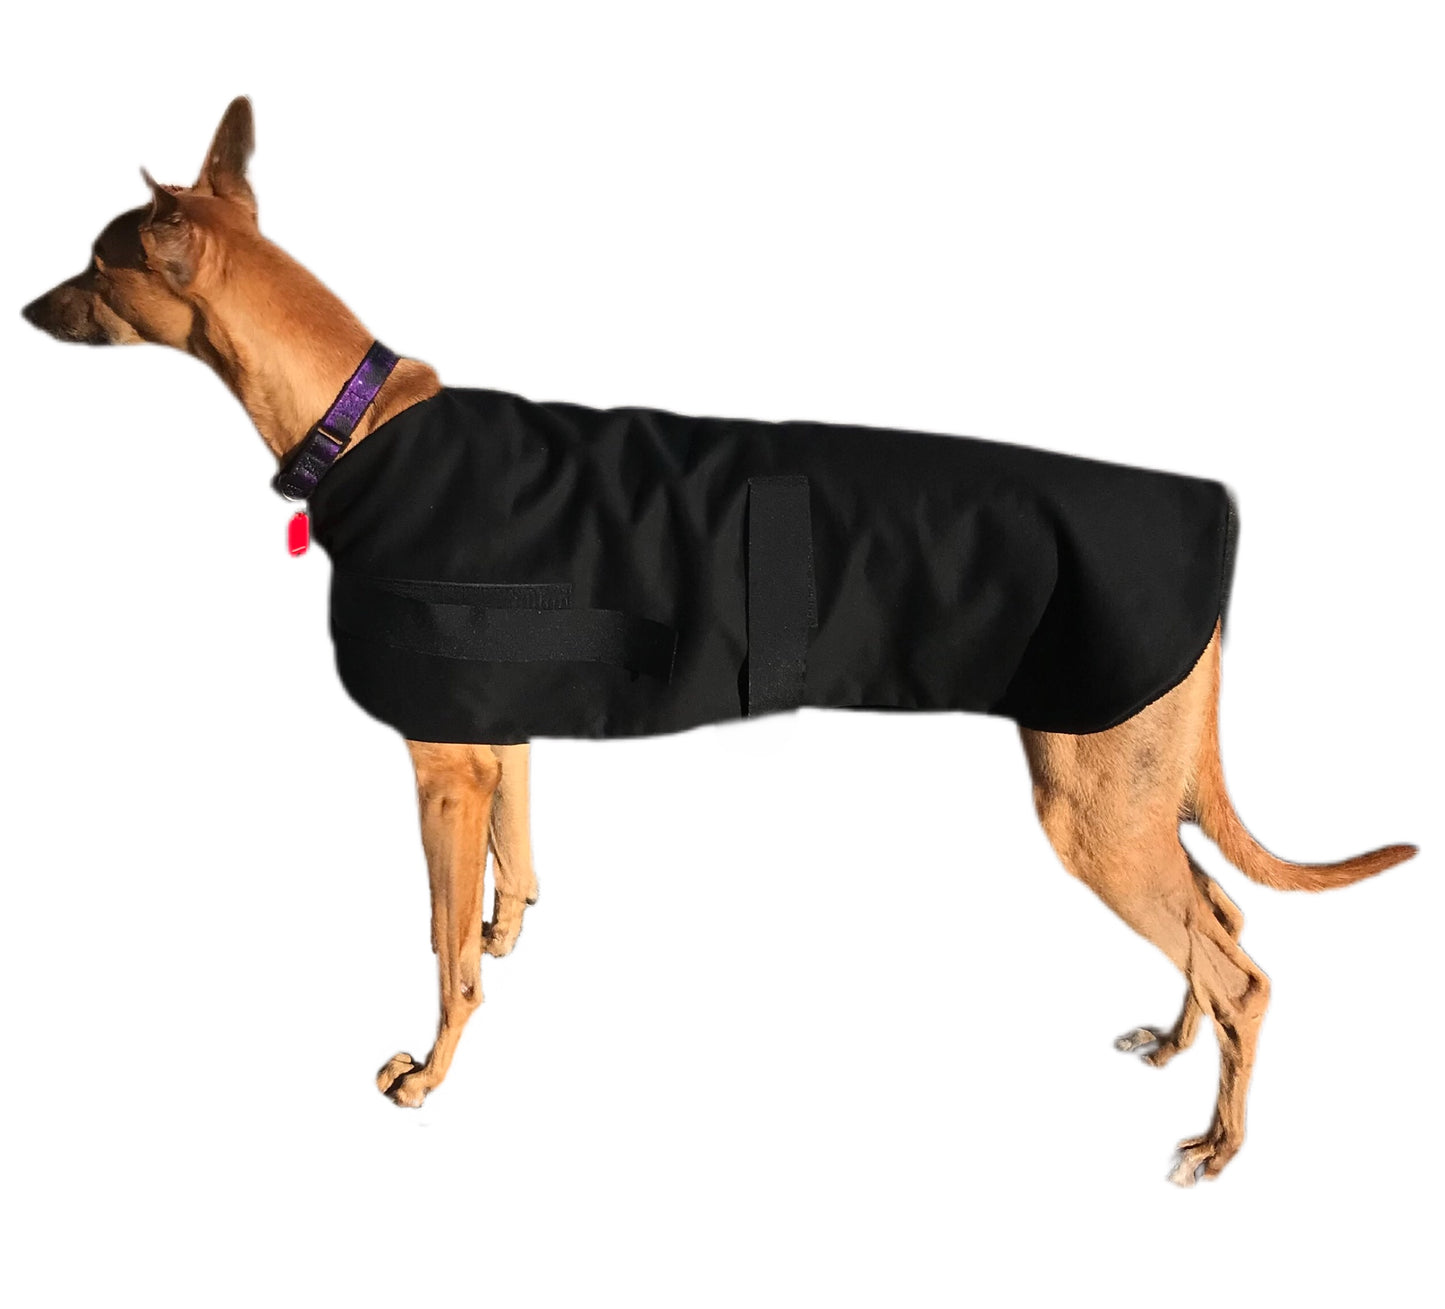 Spring wear classic style Greyhound ‘basic black’ coat in cotton & thick fleece washable